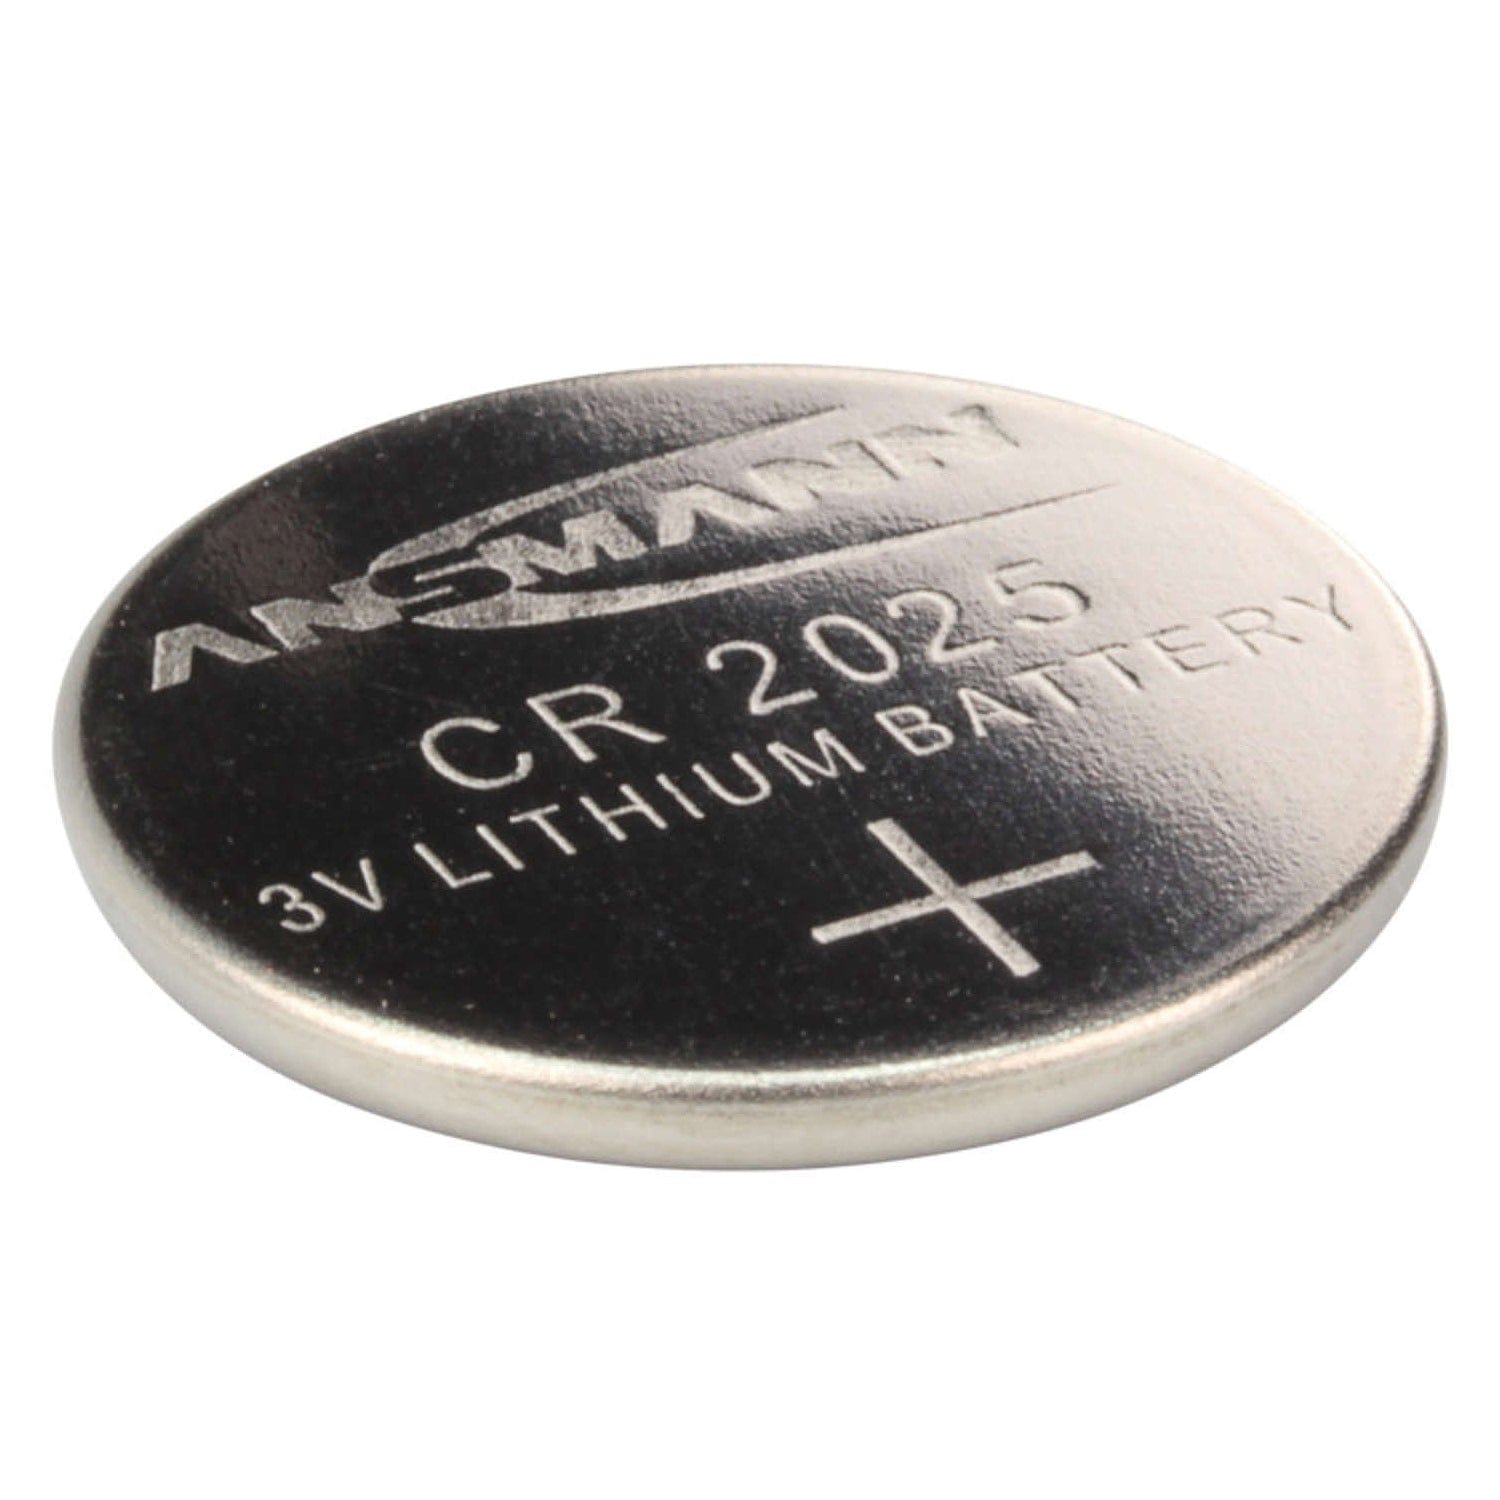 CR2025 3V Lithium Coin Cell Battery - The Pi Hut